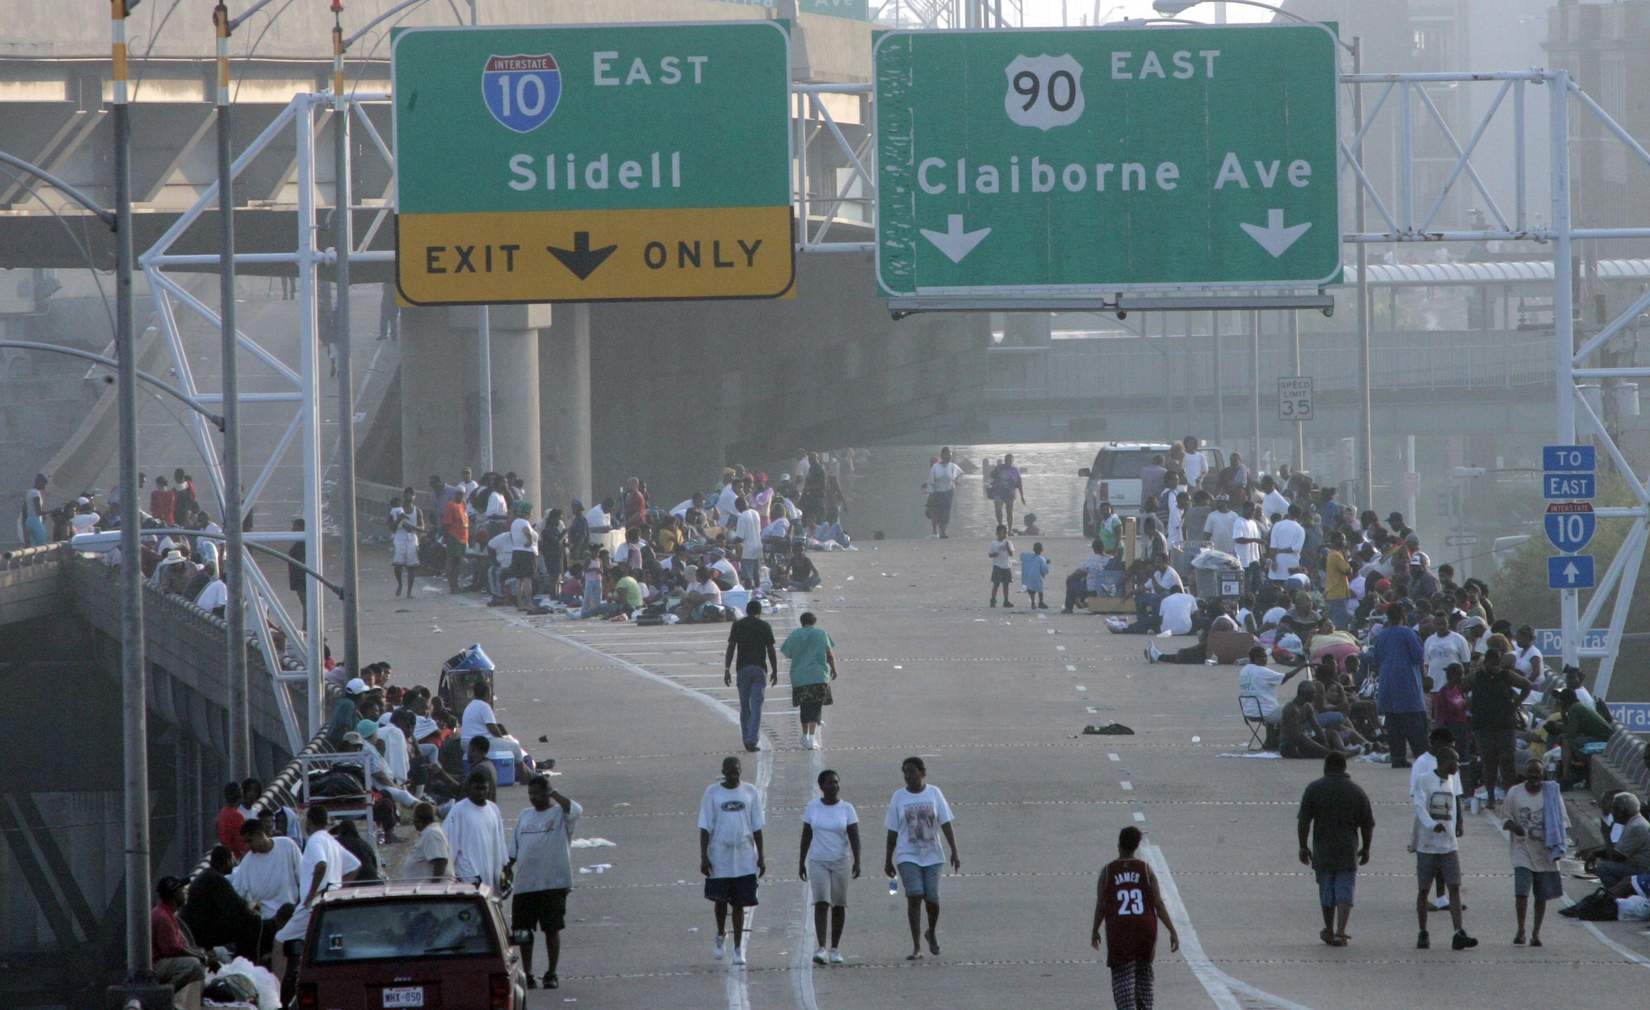 New Orleans residents take refuge on an overpass as the flood waters rise. Source: Dallas Daily News